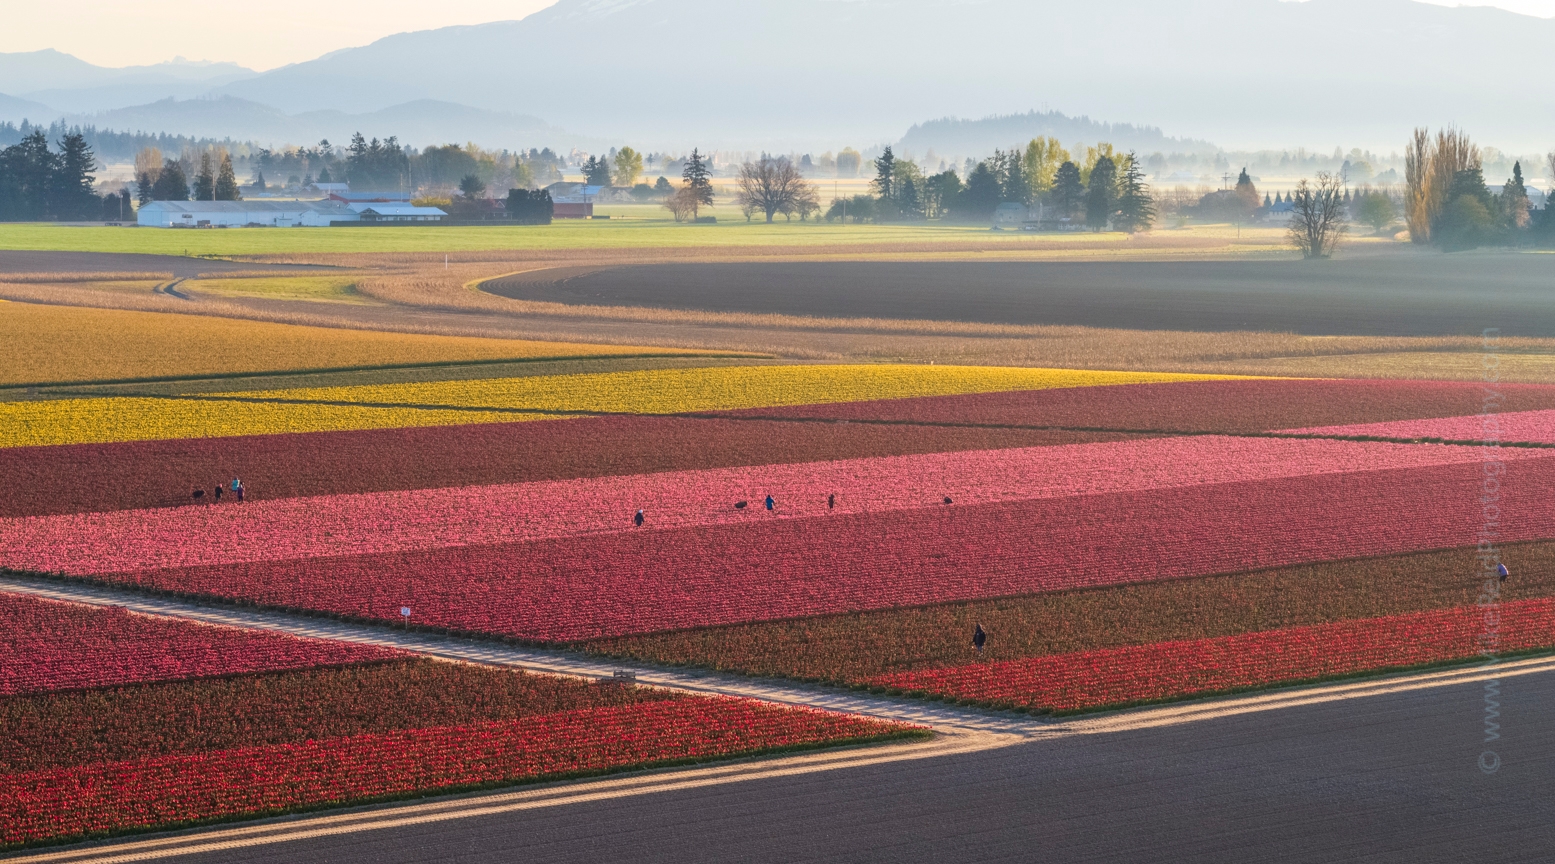 Over the Skagit Valley Colorful Tulip Fields